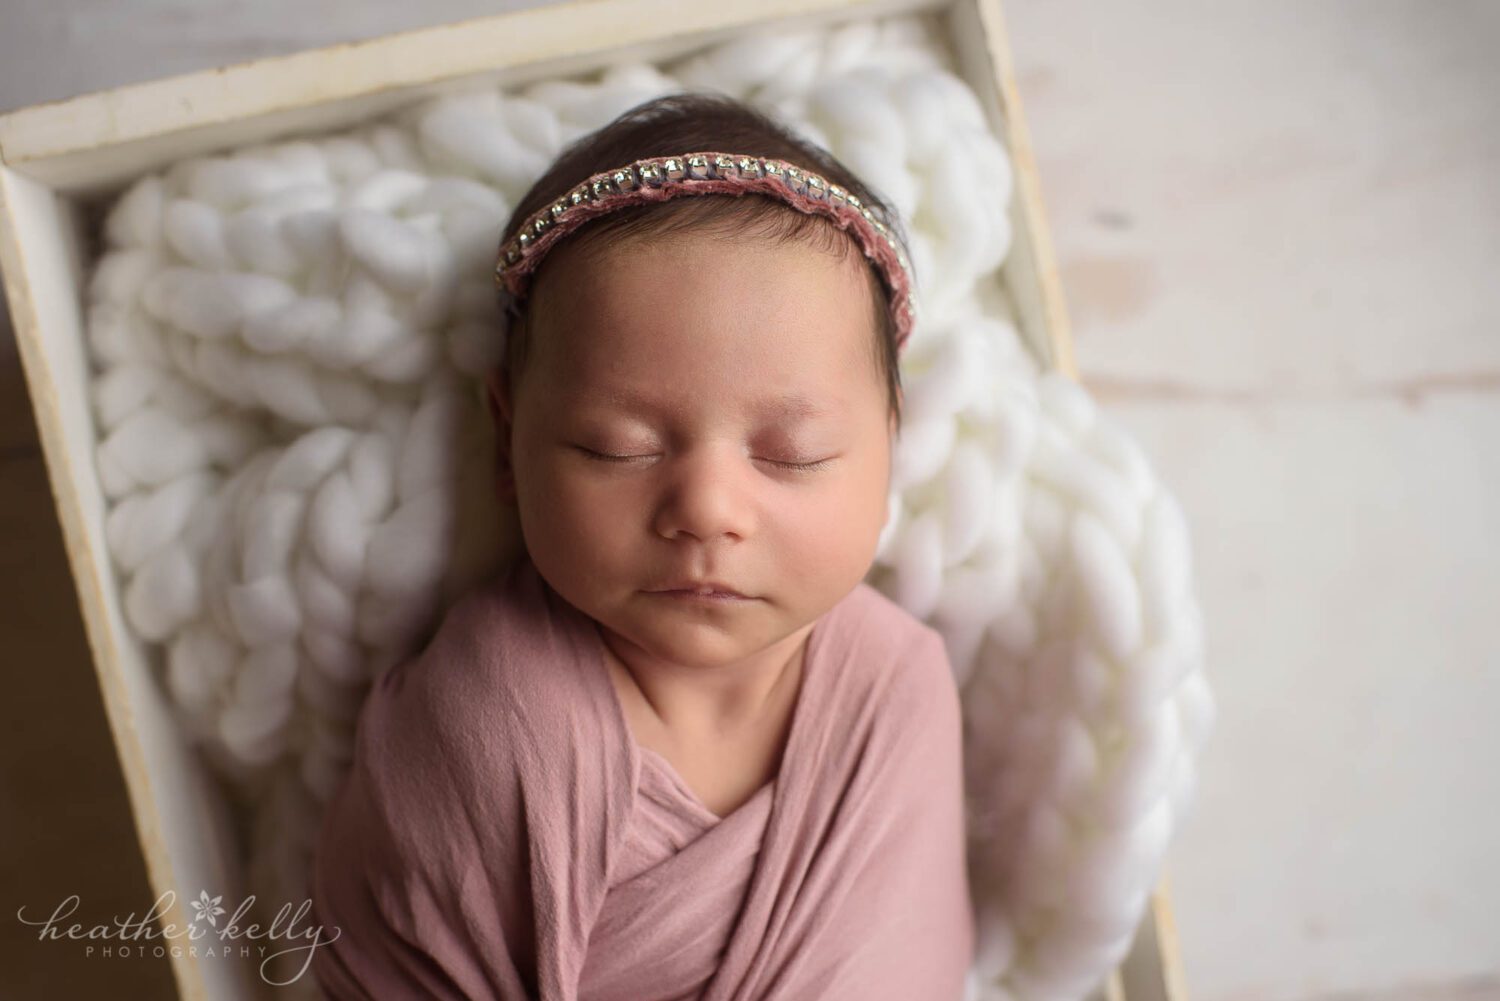 newborn photo of a baby girl wrapped in pink, sleeping in a white crate